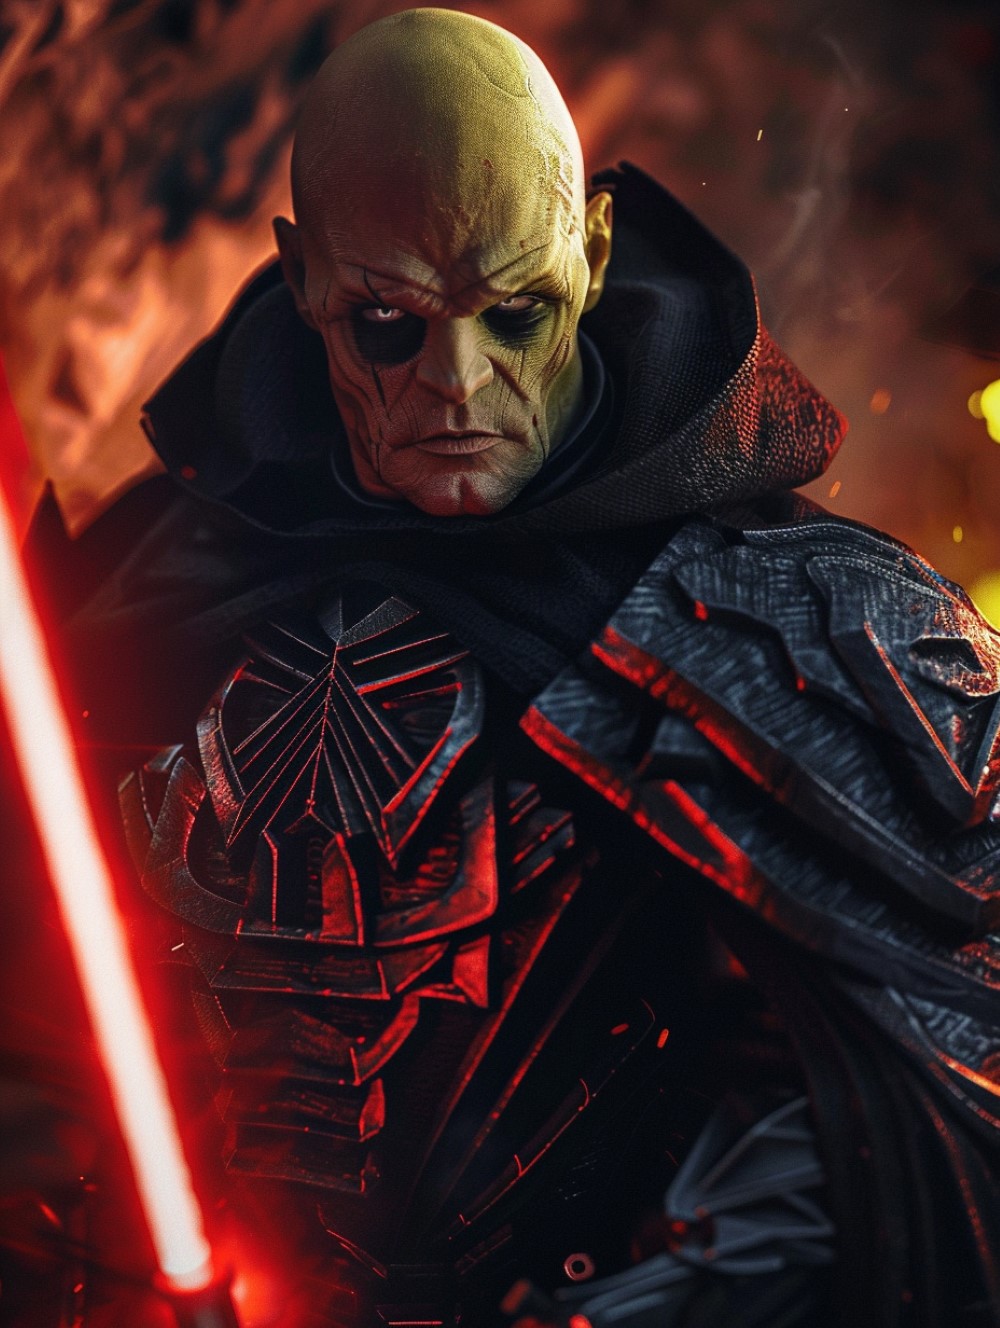 Darth Bane and his red lightsaber